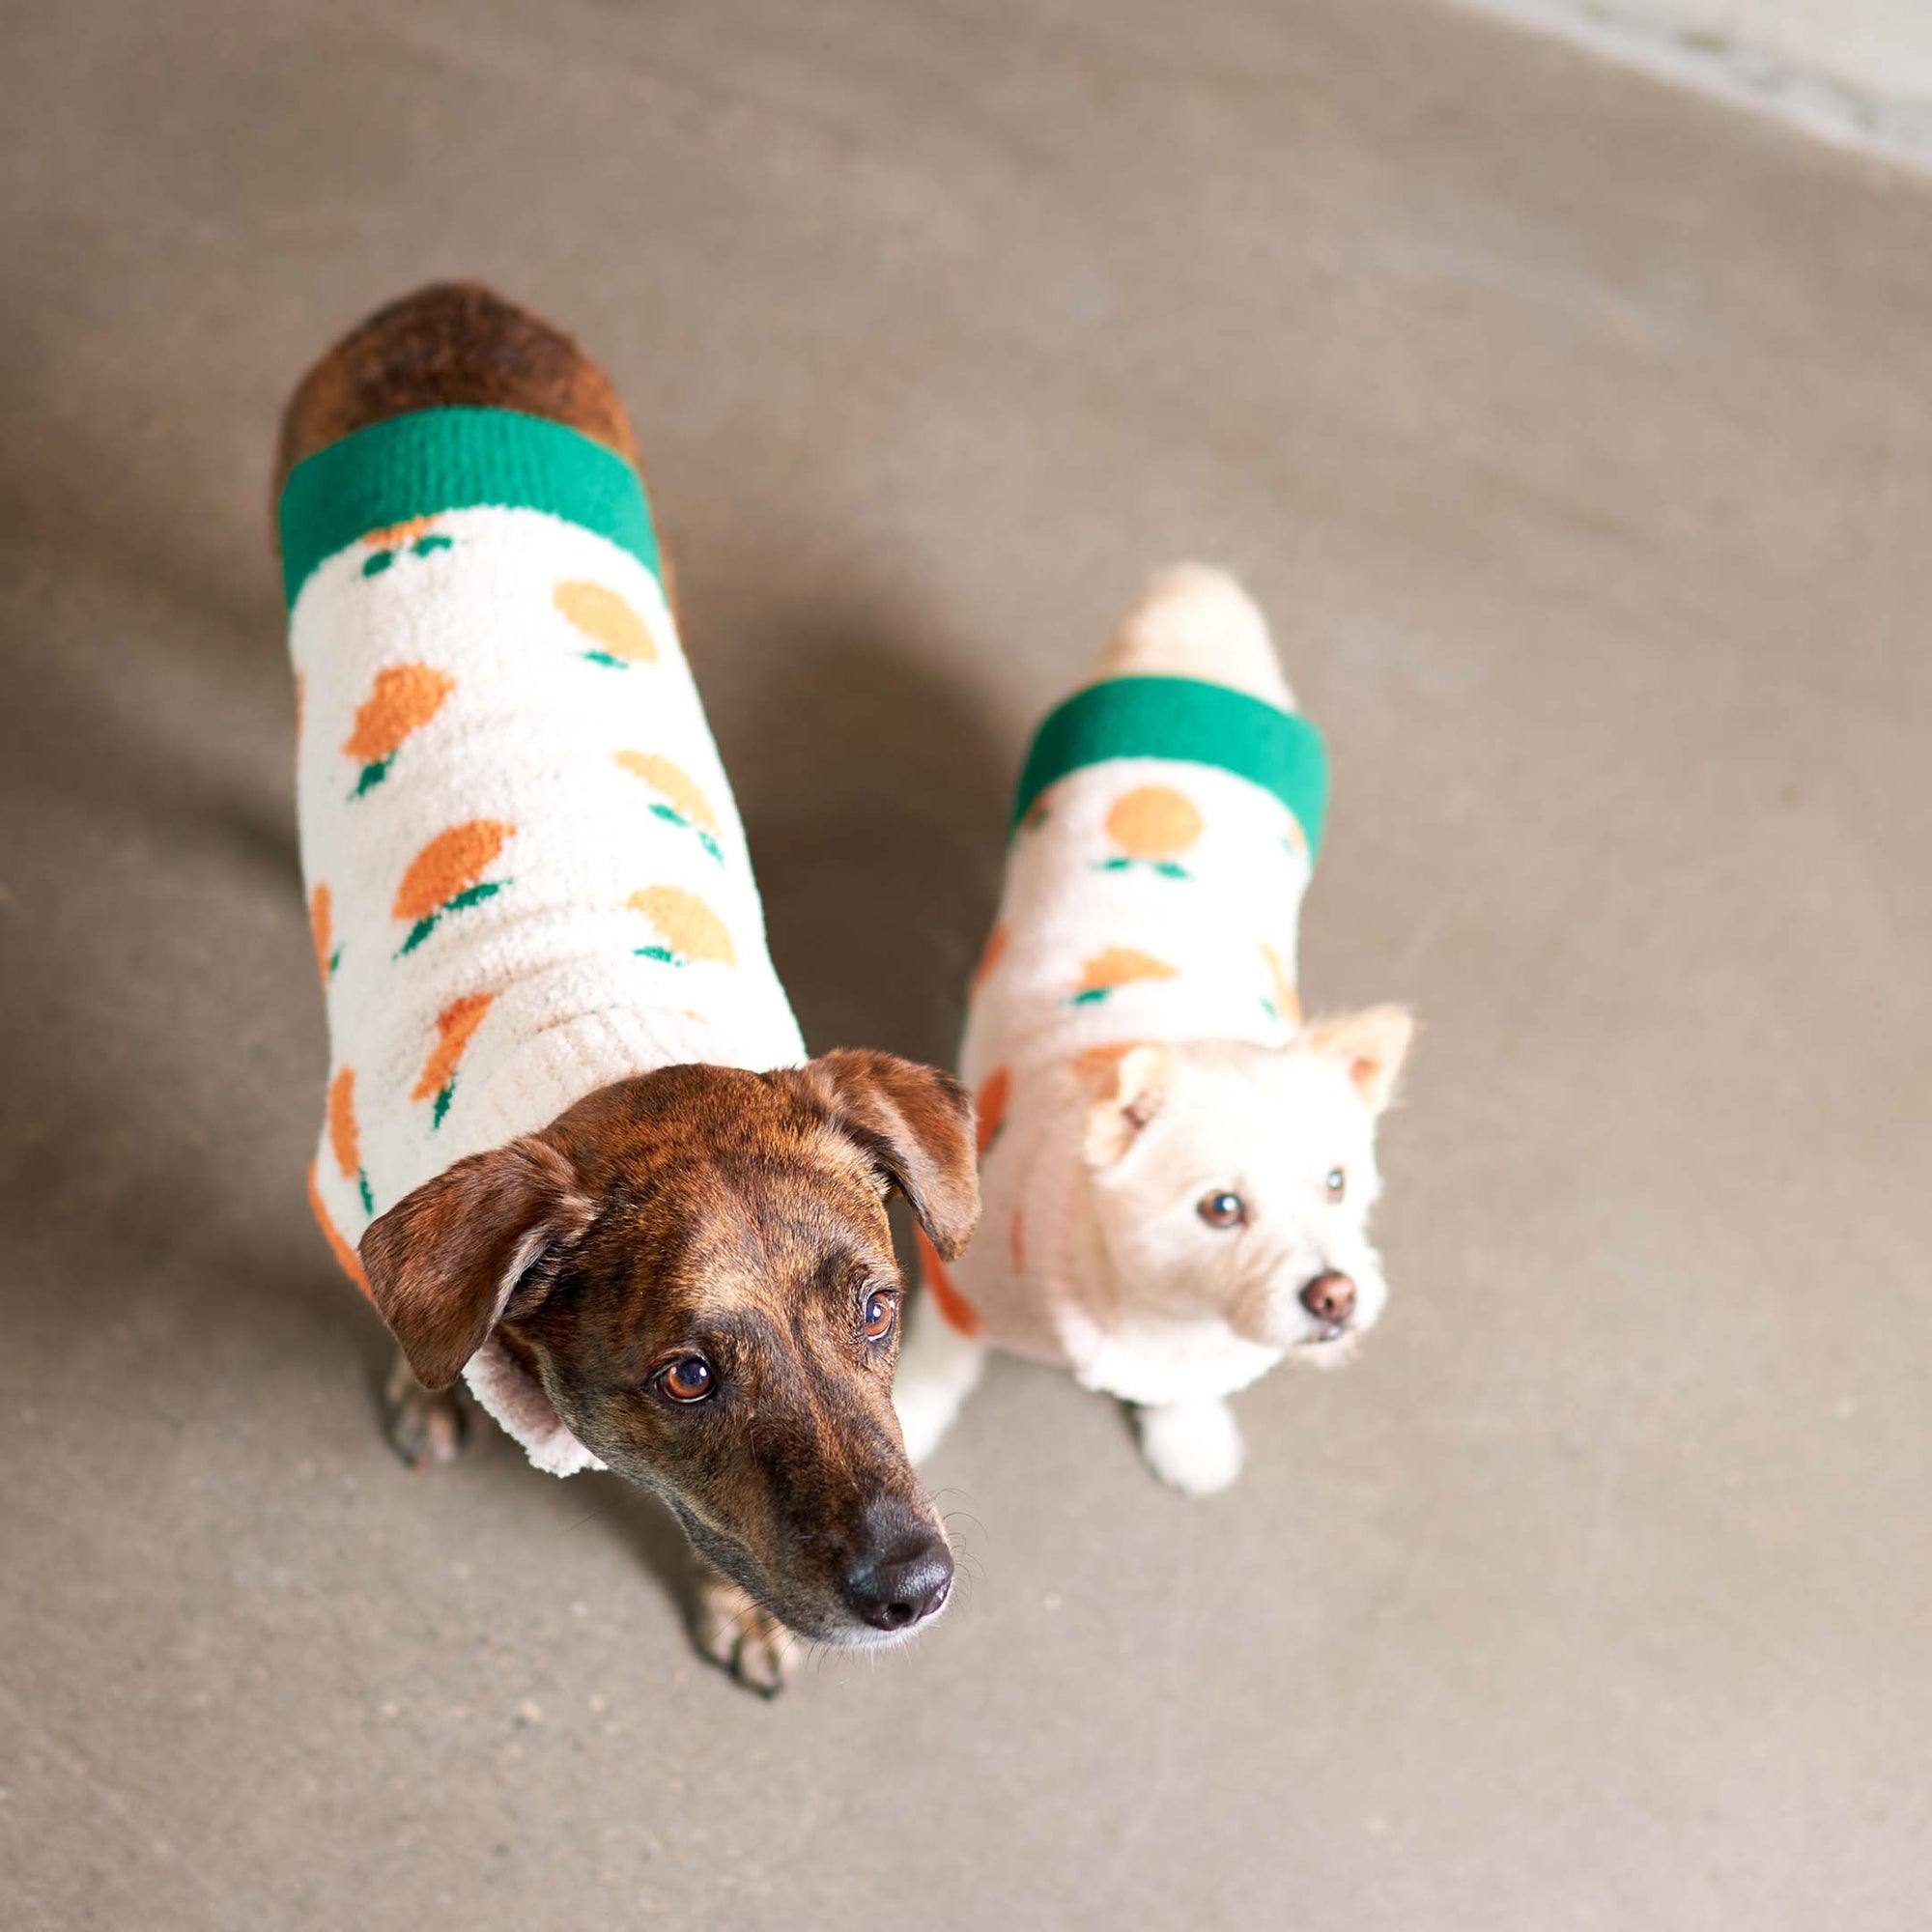 Two adorable dogs in matching "The Furryfolks" sweaters with orange motifs, exuding warmth and charm in their cozy, fashionable outfits.